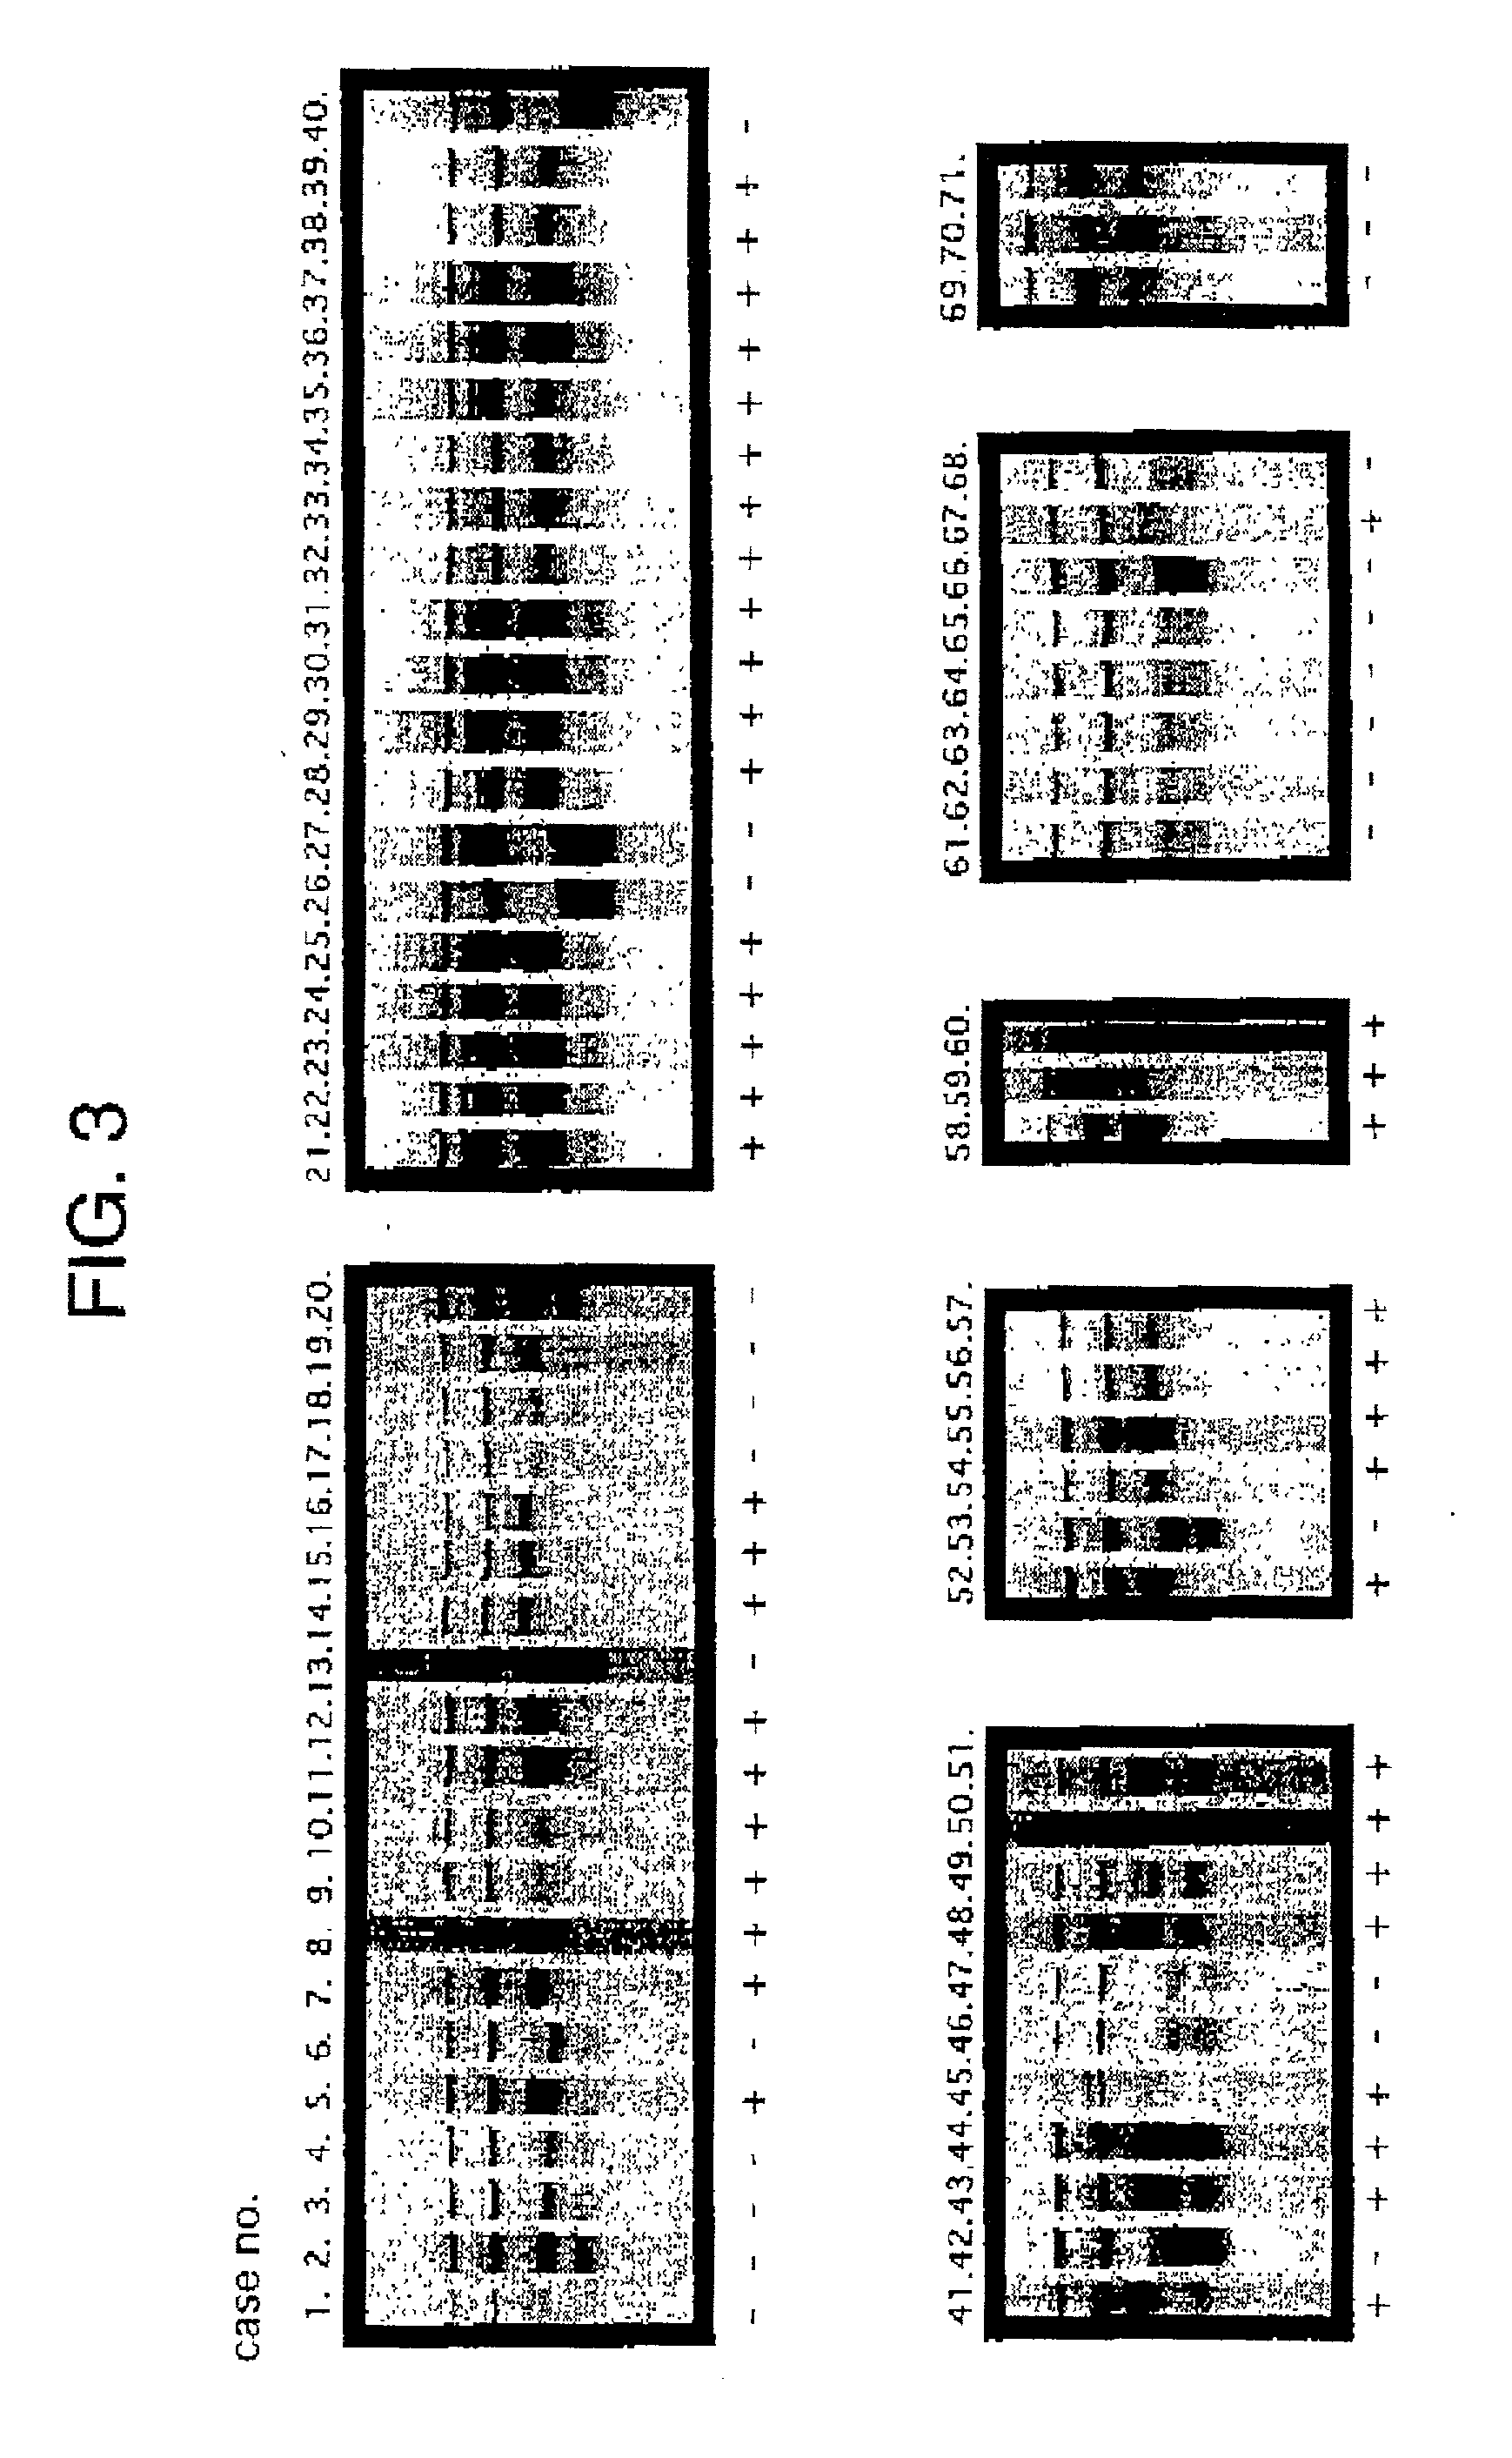 Method of testing squamous epithelial cells